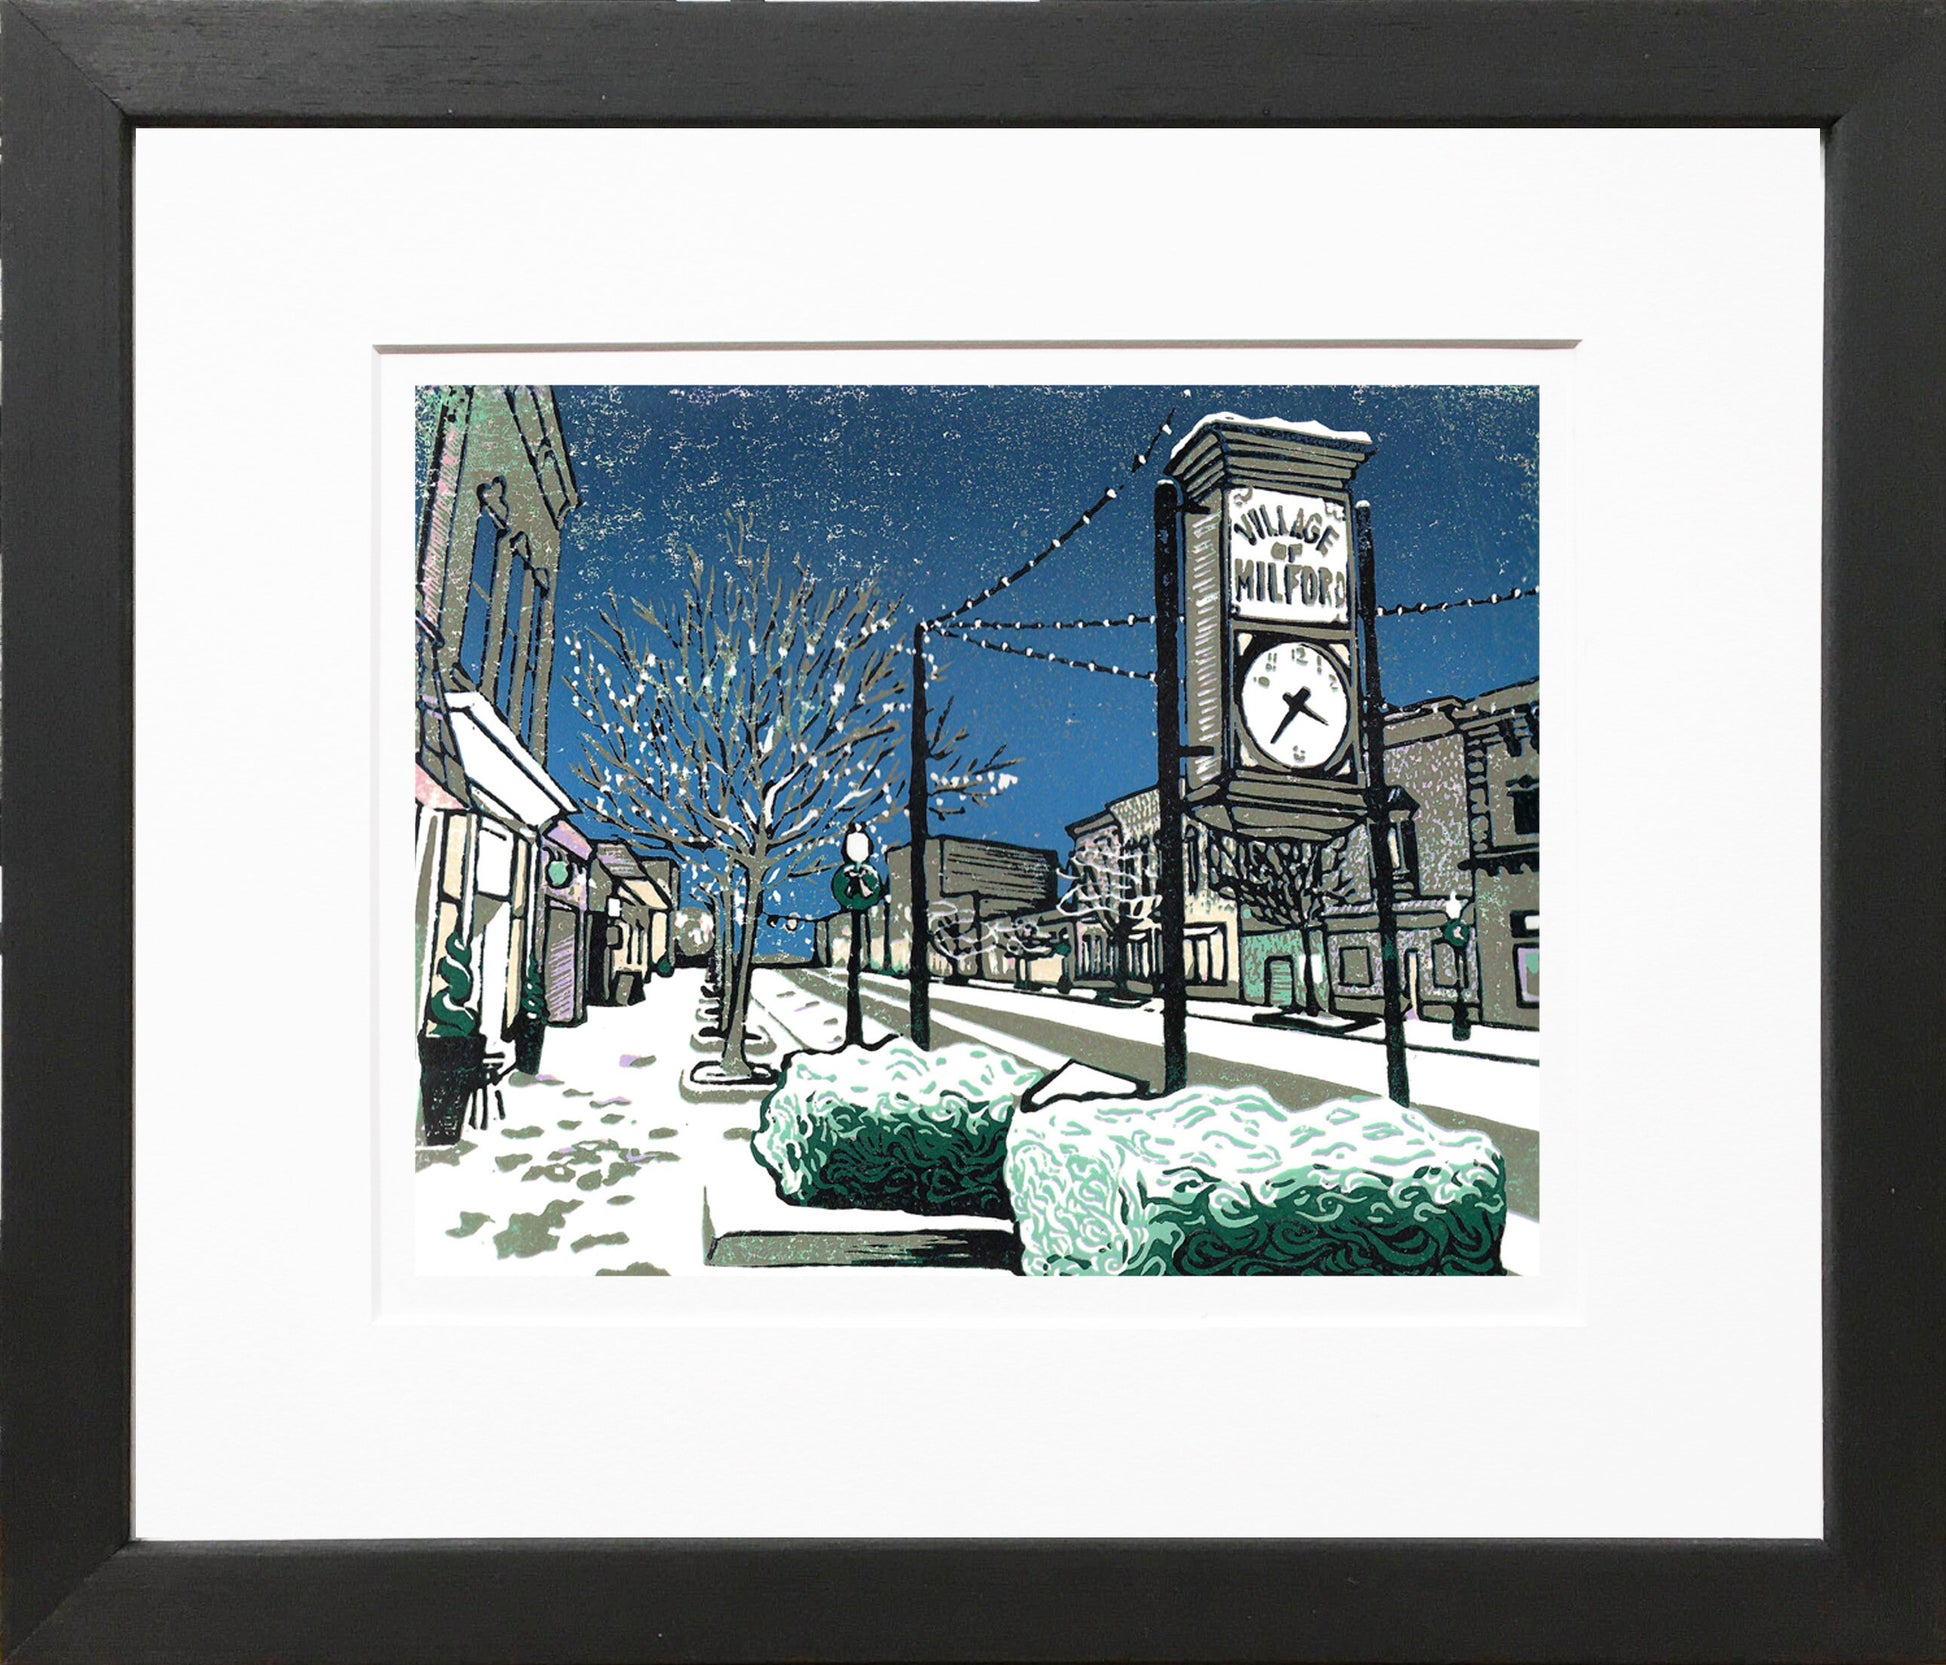 Contemporary Milford, Michigan, art by Natalia Wohletz of Peninsula Prints titled Milford Lights.